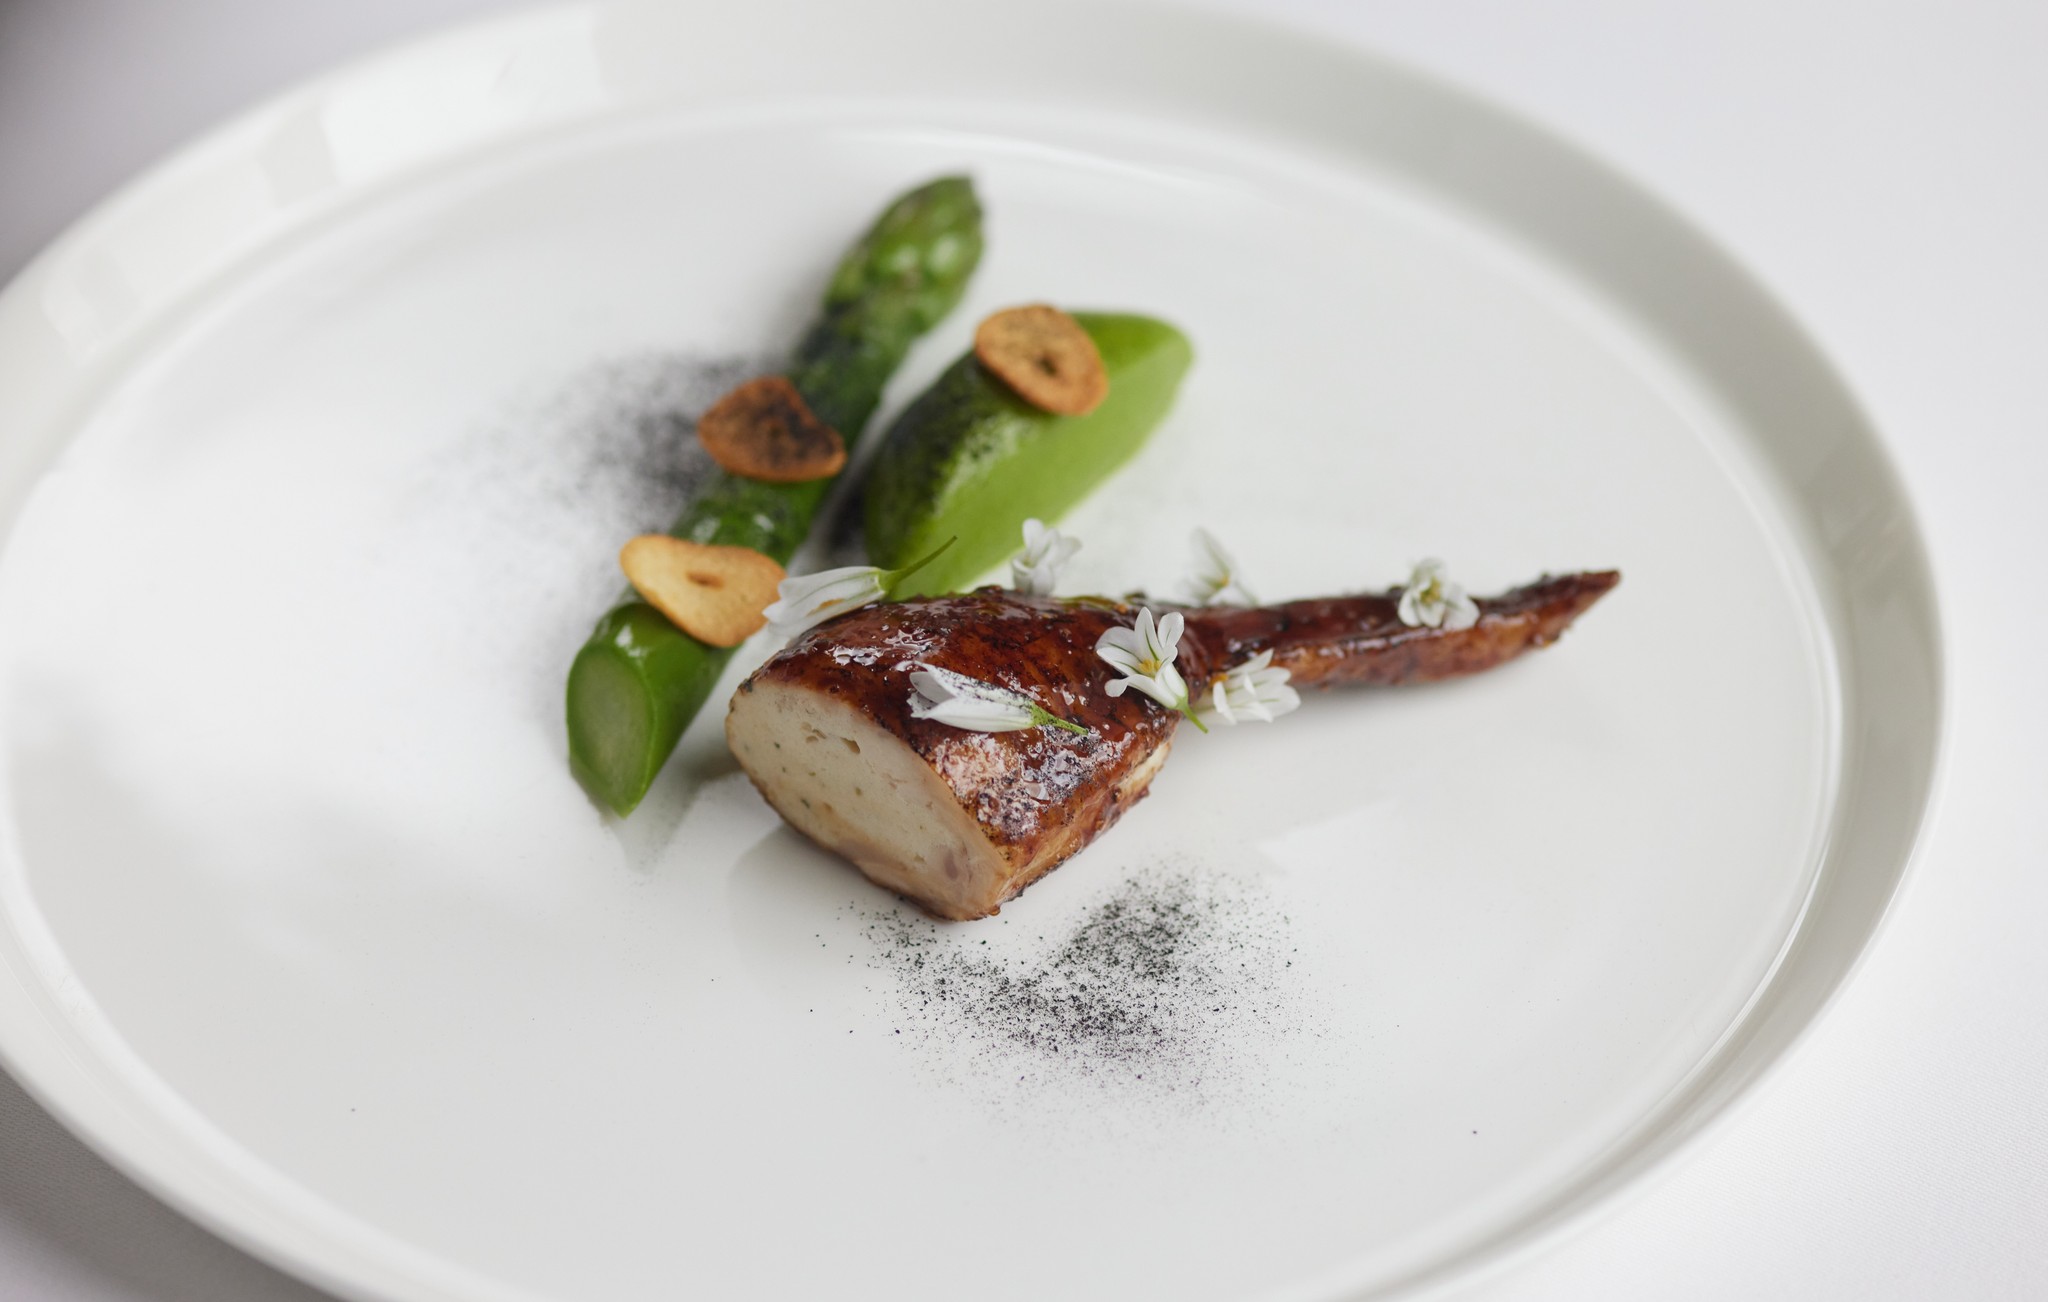 Cumbrian chicken wing with asparagus and wild garlic dish from Marcus Restaurant 